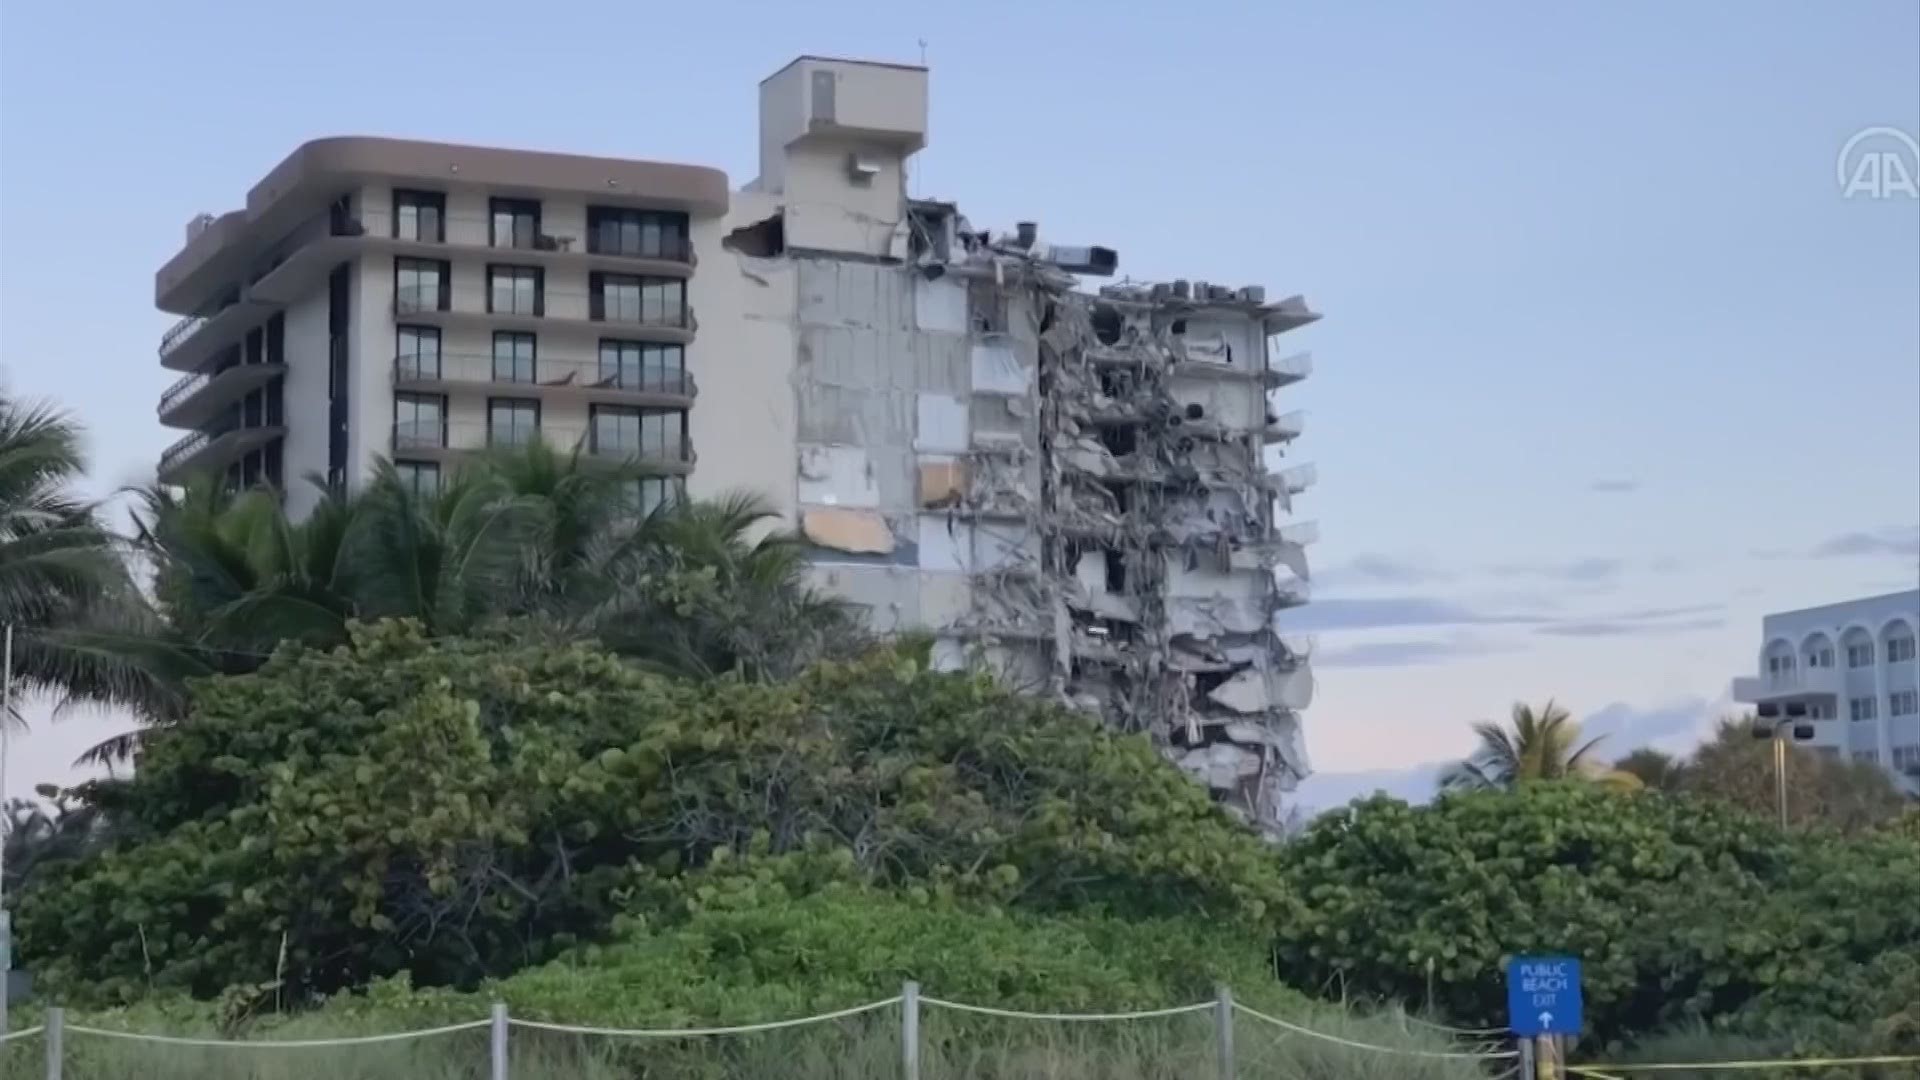 The study discovered that the “12-story condominium” was sinking at a rate of nearly 2 millimeters per year – between 1993 and 1999.